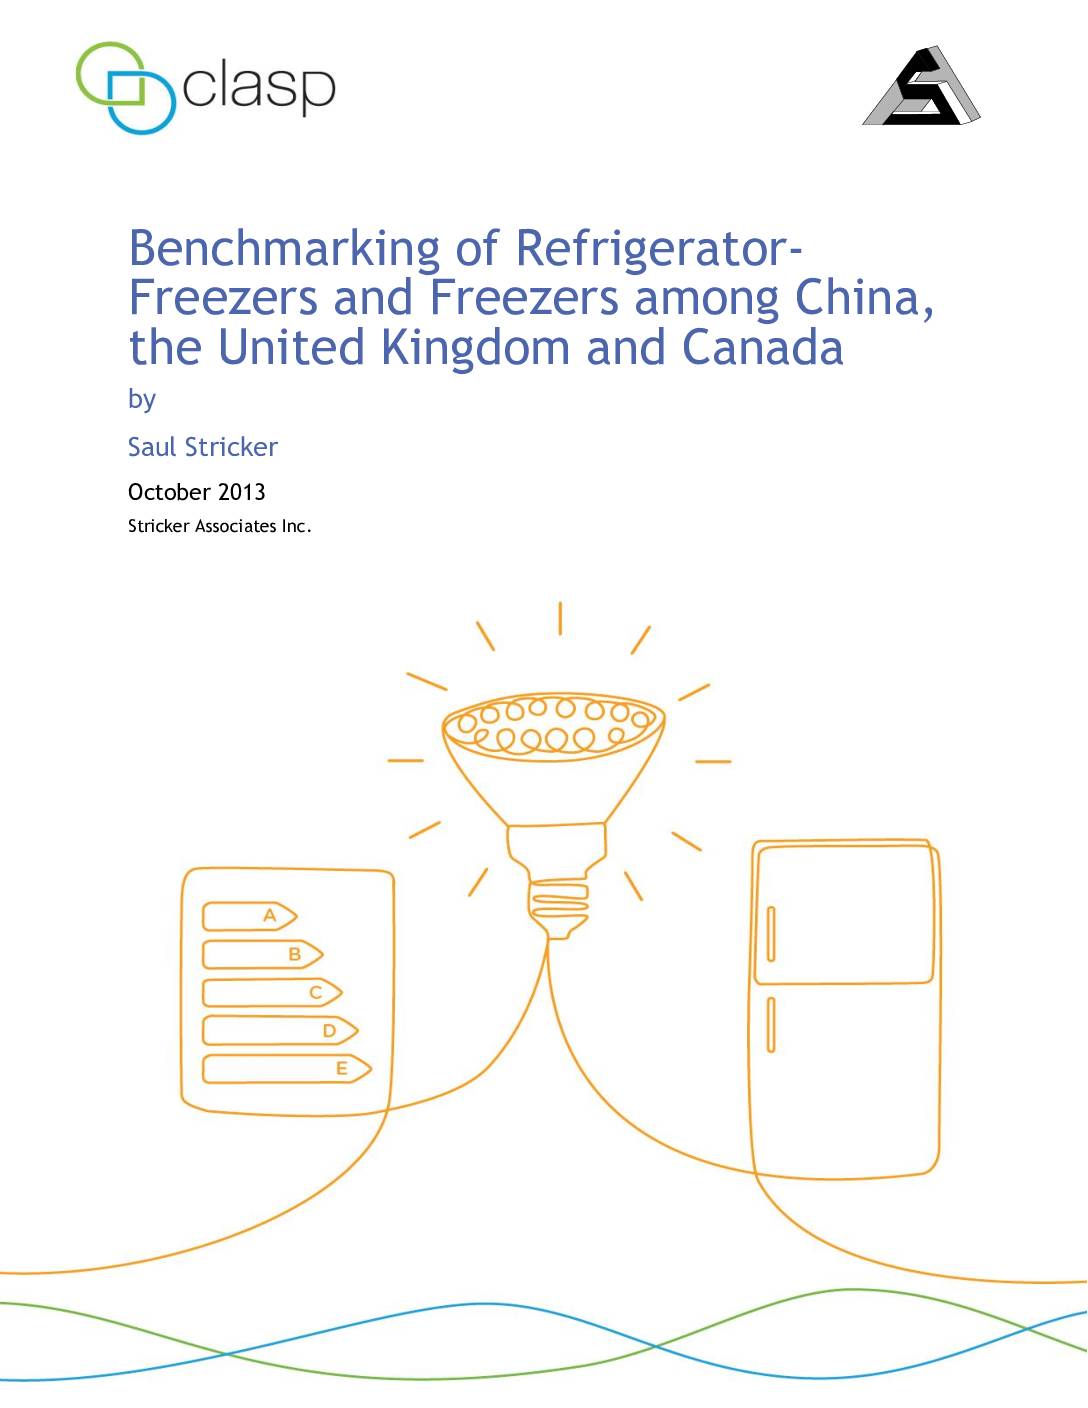 Benchmarking of Refrigerator-Freezers and Freezers among China, the United Kingdom and Canada